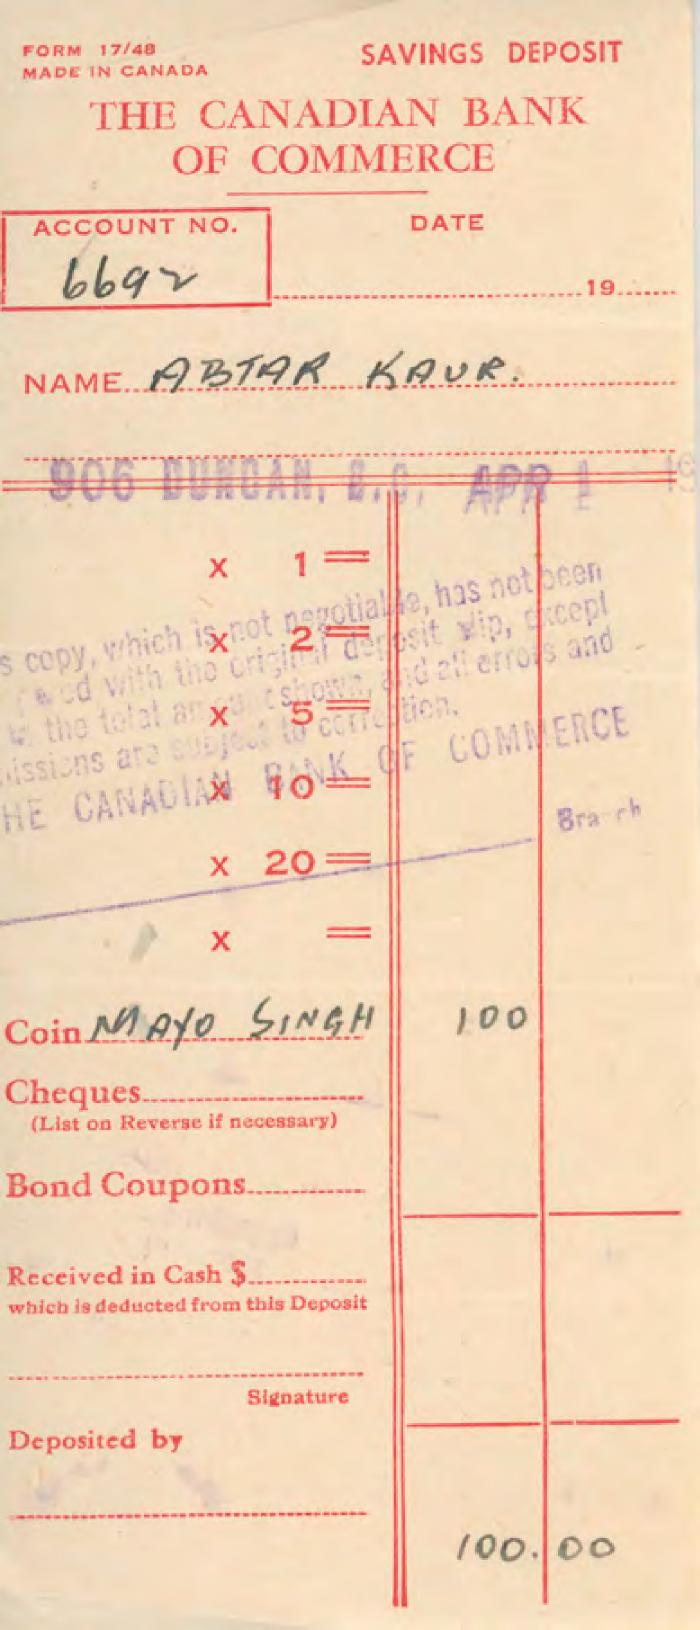 [Bank receipt from the Canadian Bank of Commerce to Abtar Kaur]